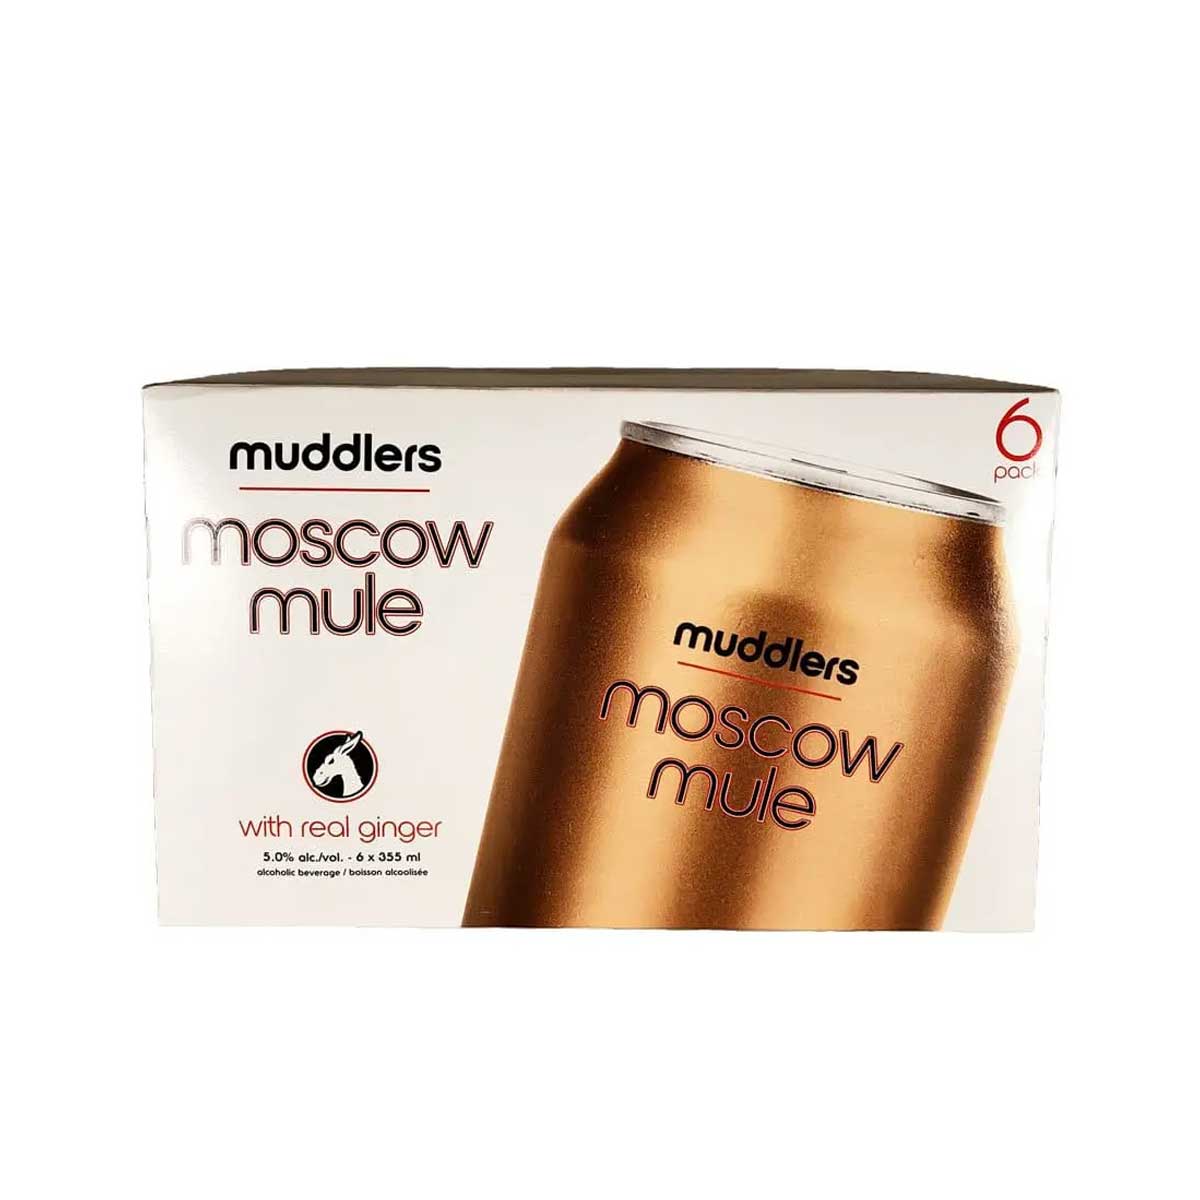 TAG Liquor Stores BC-MUDDLERS MOSCOW MULE 6 CANS